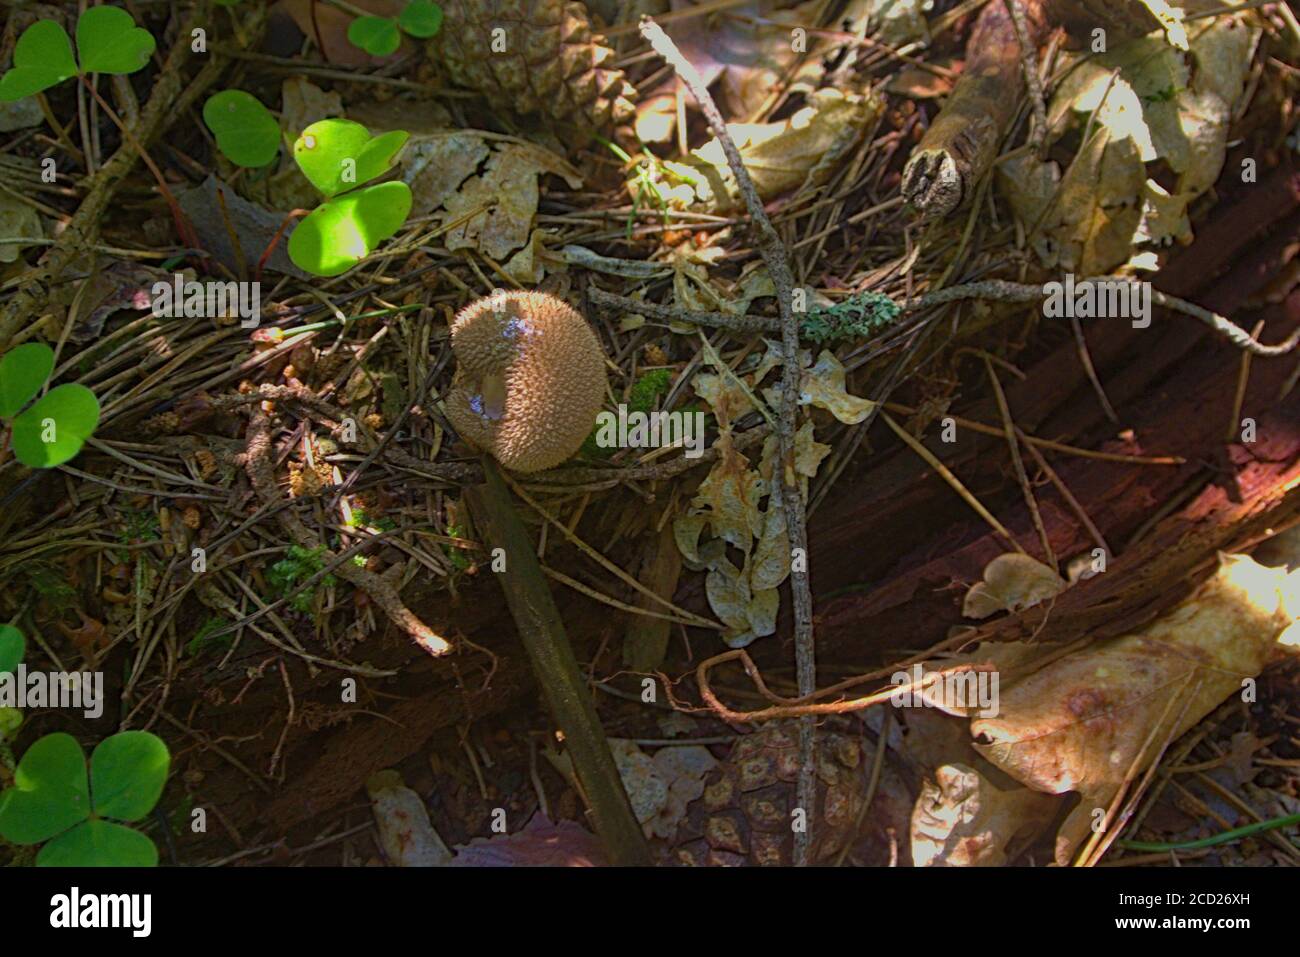 A poisonous puffball mushroom growing on a forest floor Stock Photo